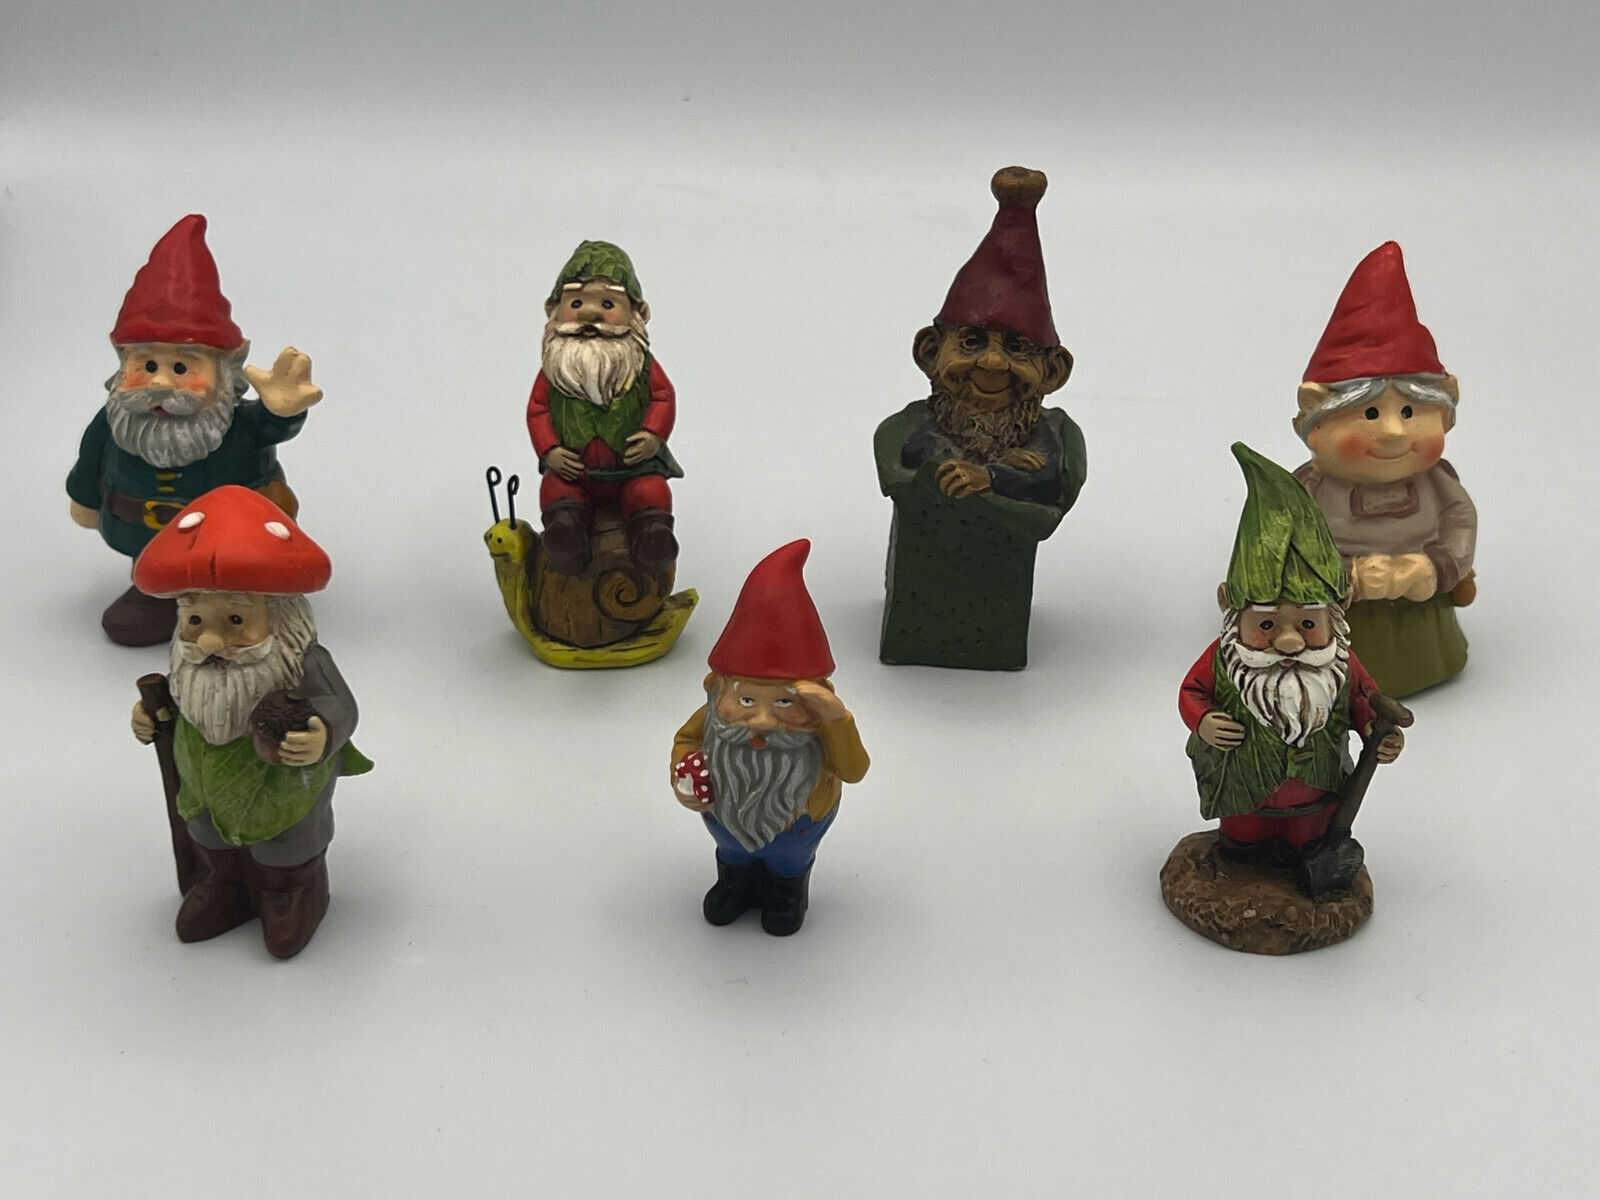 Lot of 7 Miniature Gnomes Figures Colorful & Nicely Done